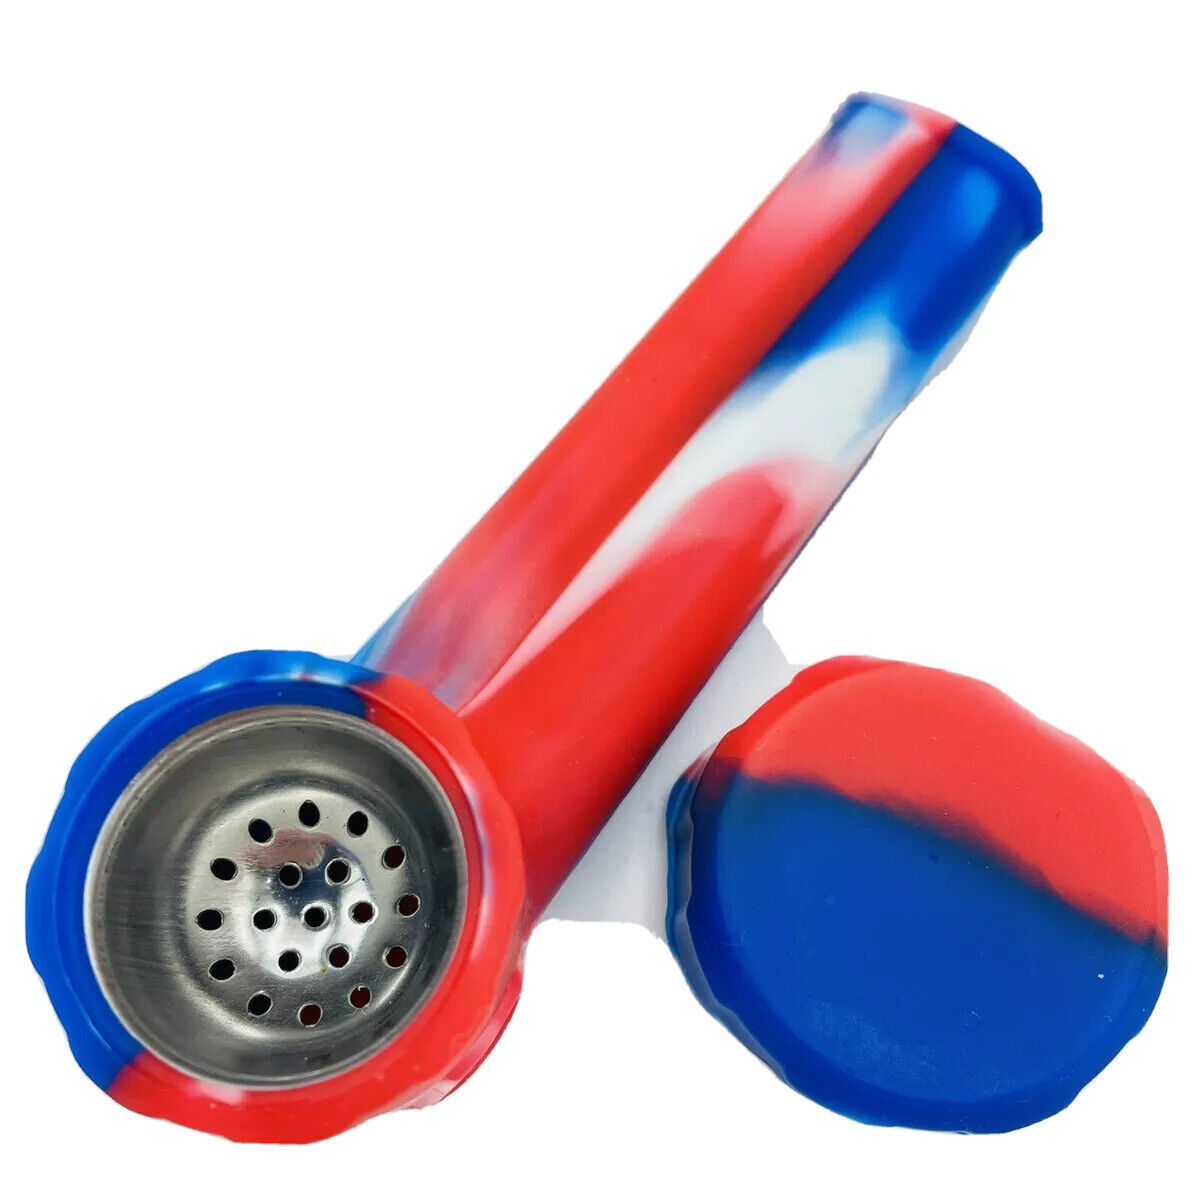 Silicone Smoking Pipe with Metal Bowl & Cap Lid | Red/White/Blue  | USA